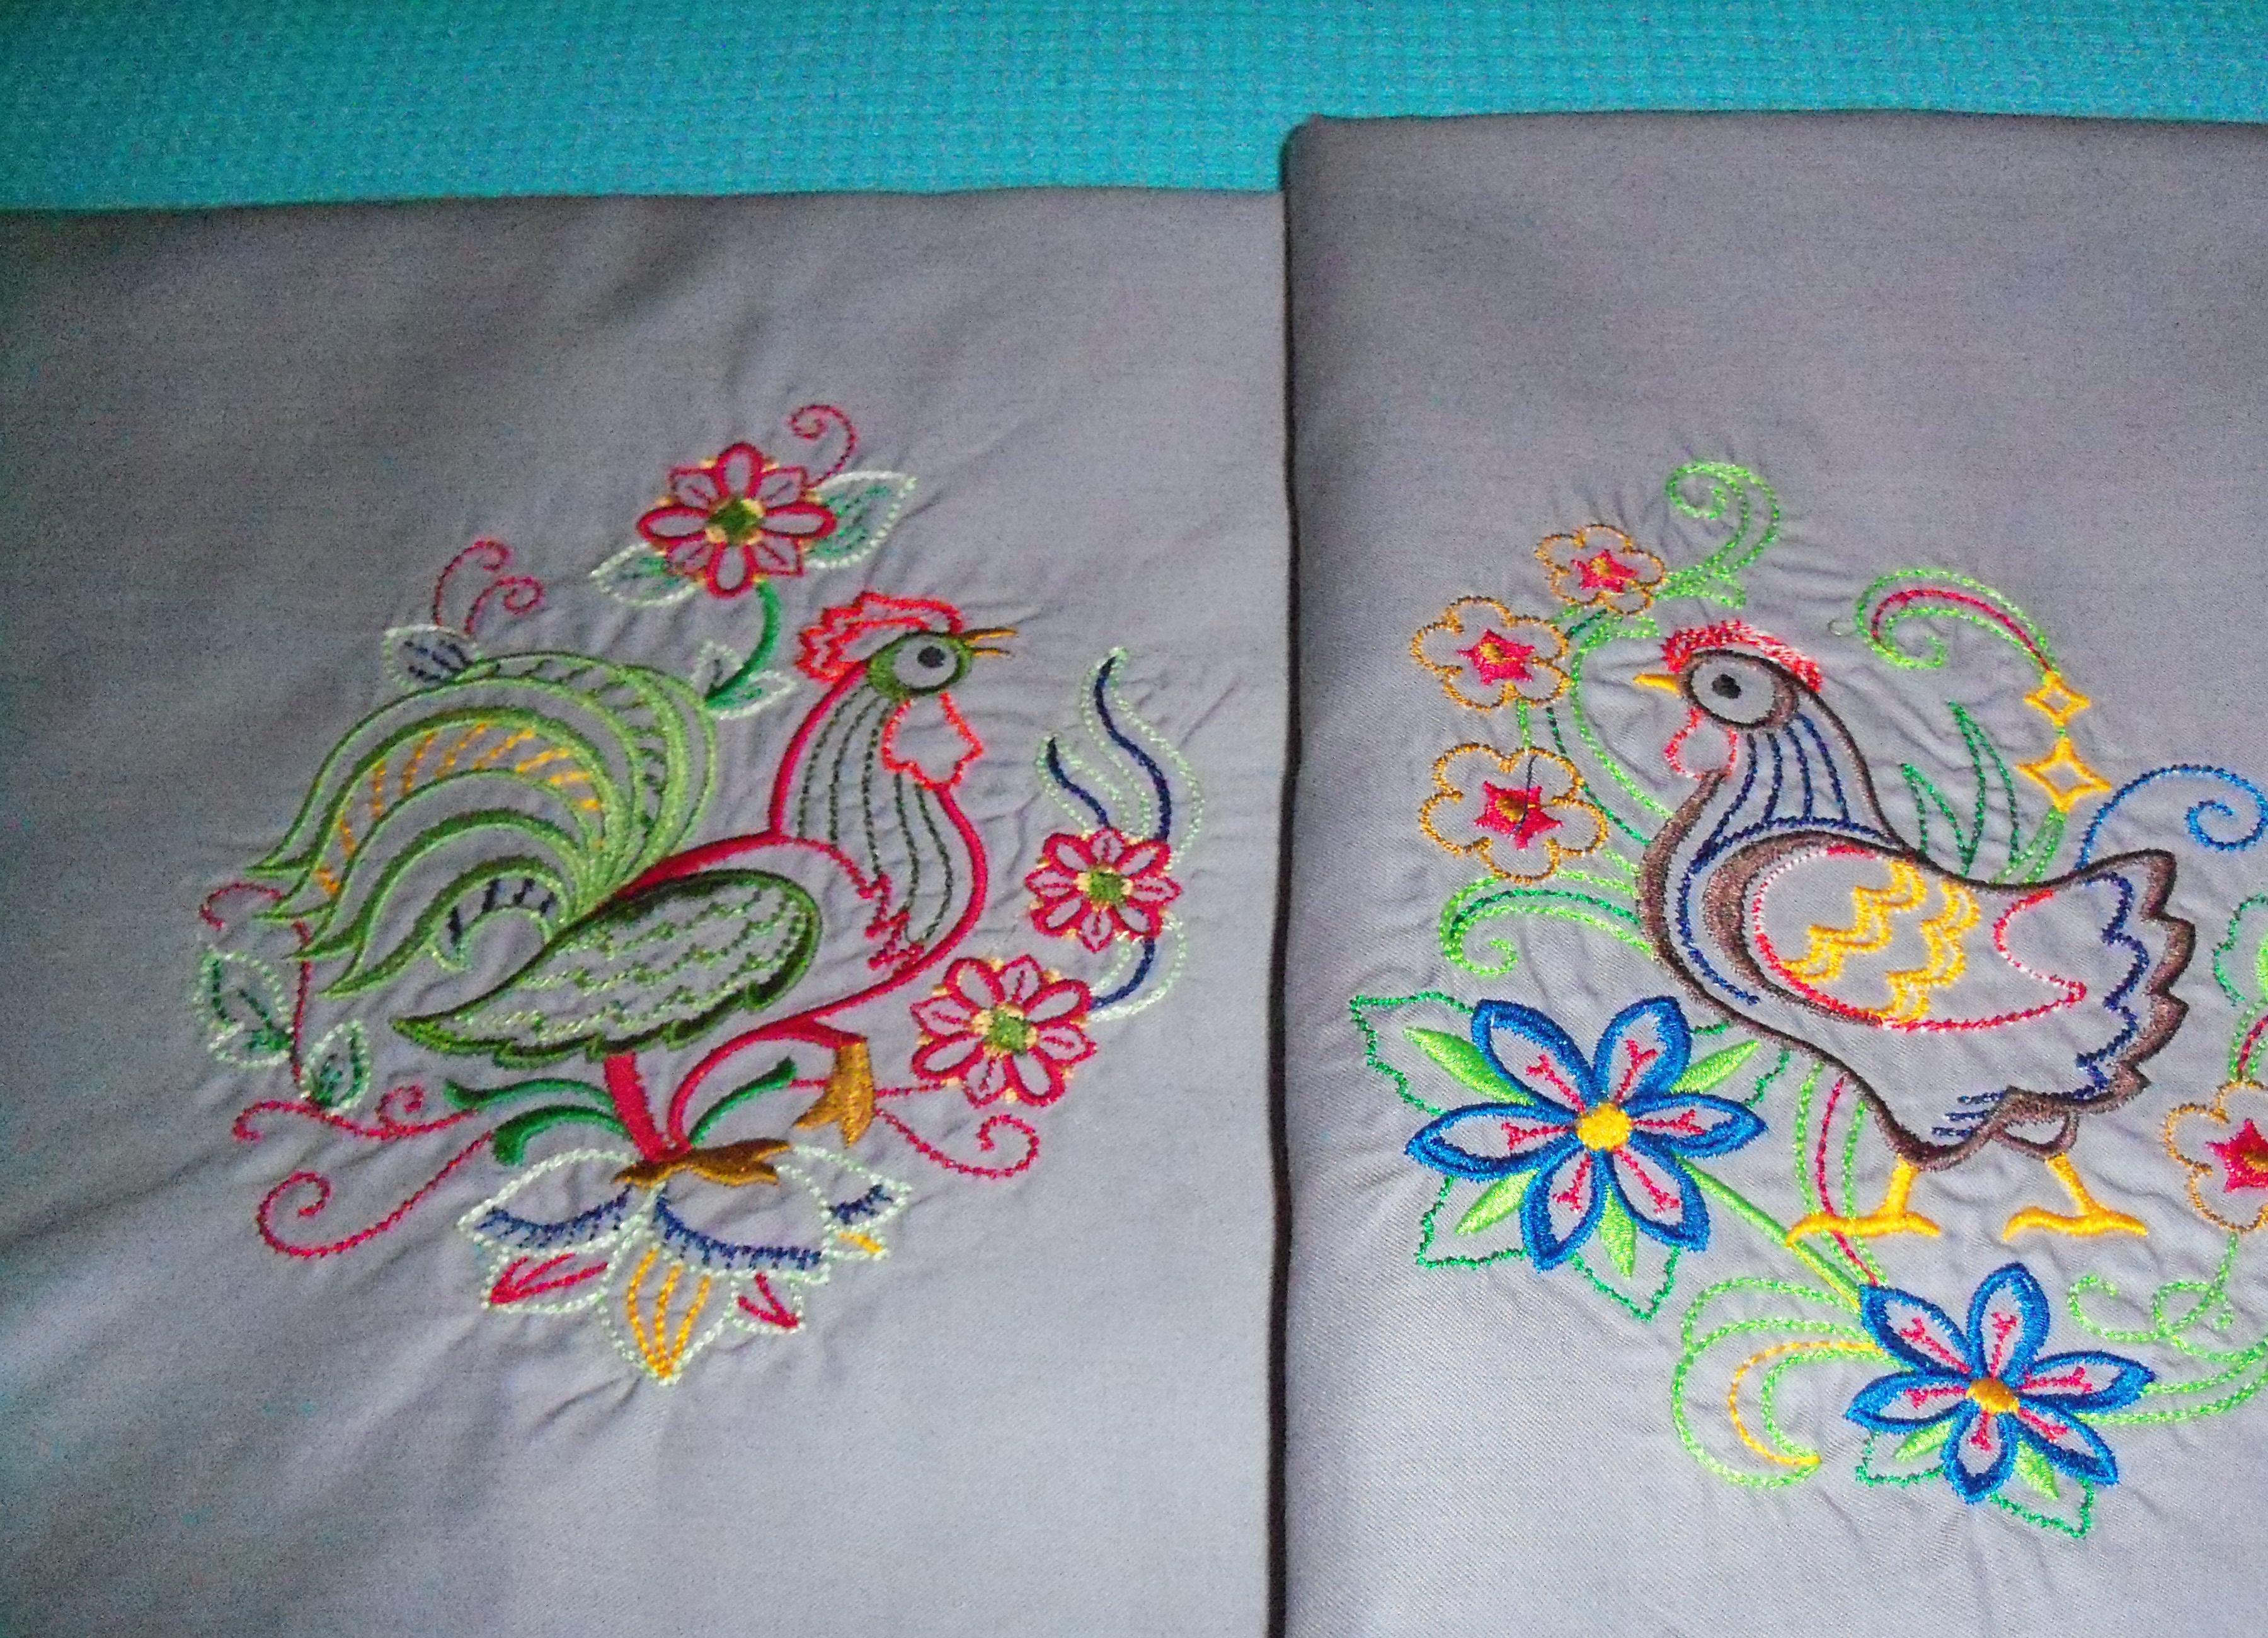 Free Embroidery Designs, Cute Embroidery Designs
